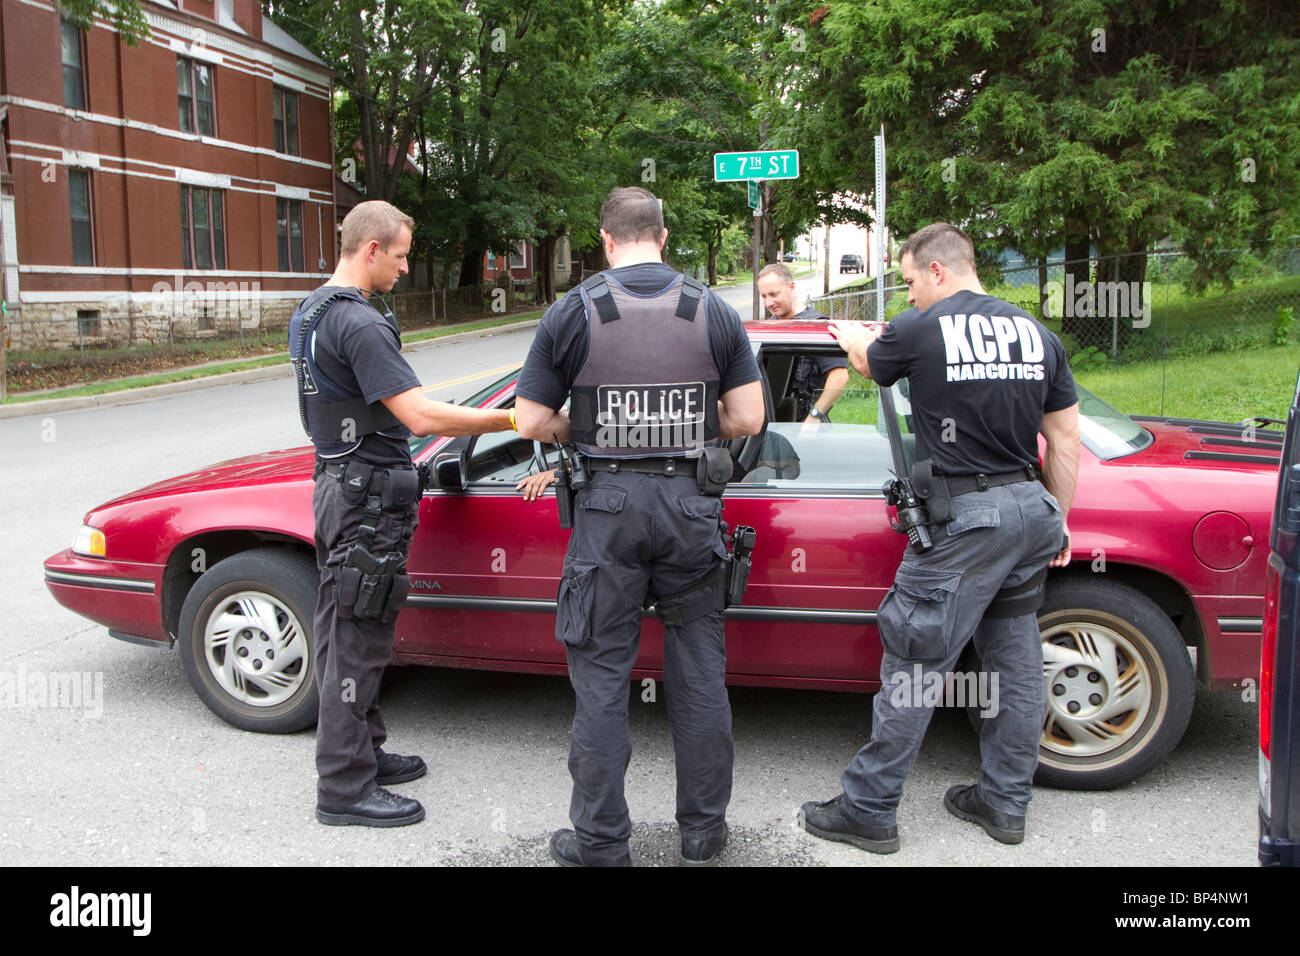 Police officers from tactical team talking to an individual found sleeping in a vehicle in an intersection. Kansas City, MO, PD. Stock Photo